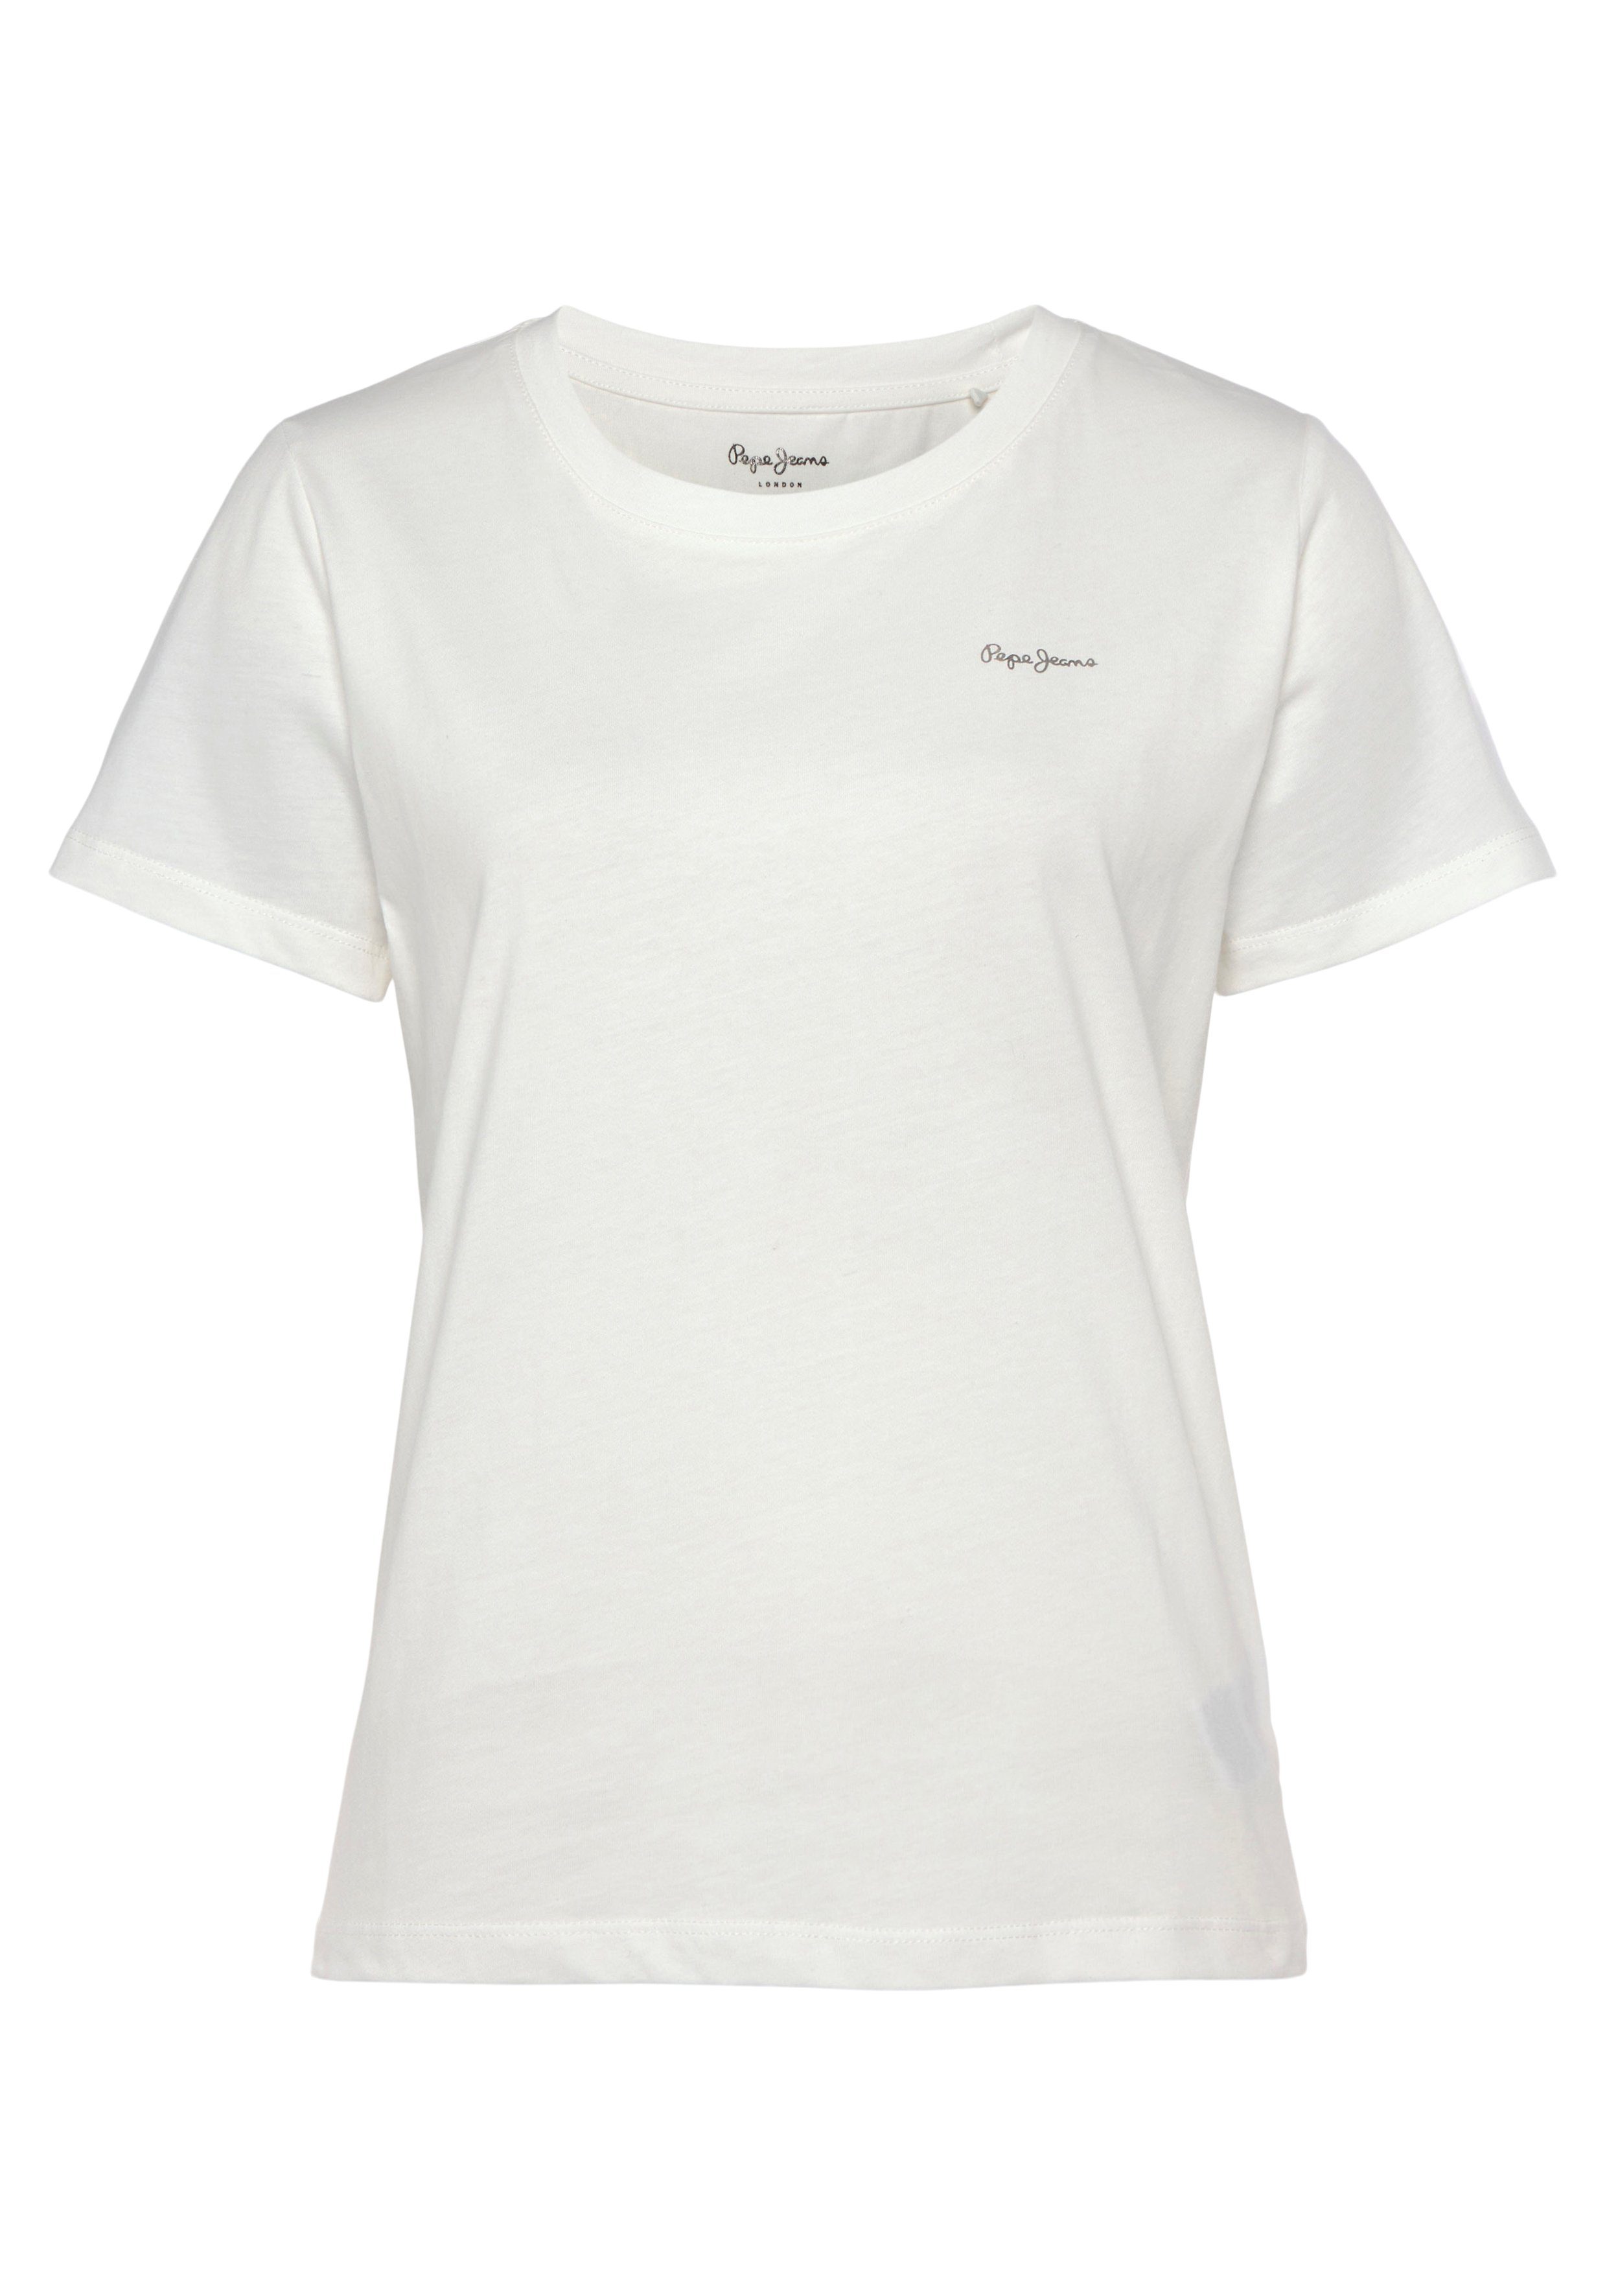 Pepe Jeans T-Shirt TOMITA offwhite | T-Shirts